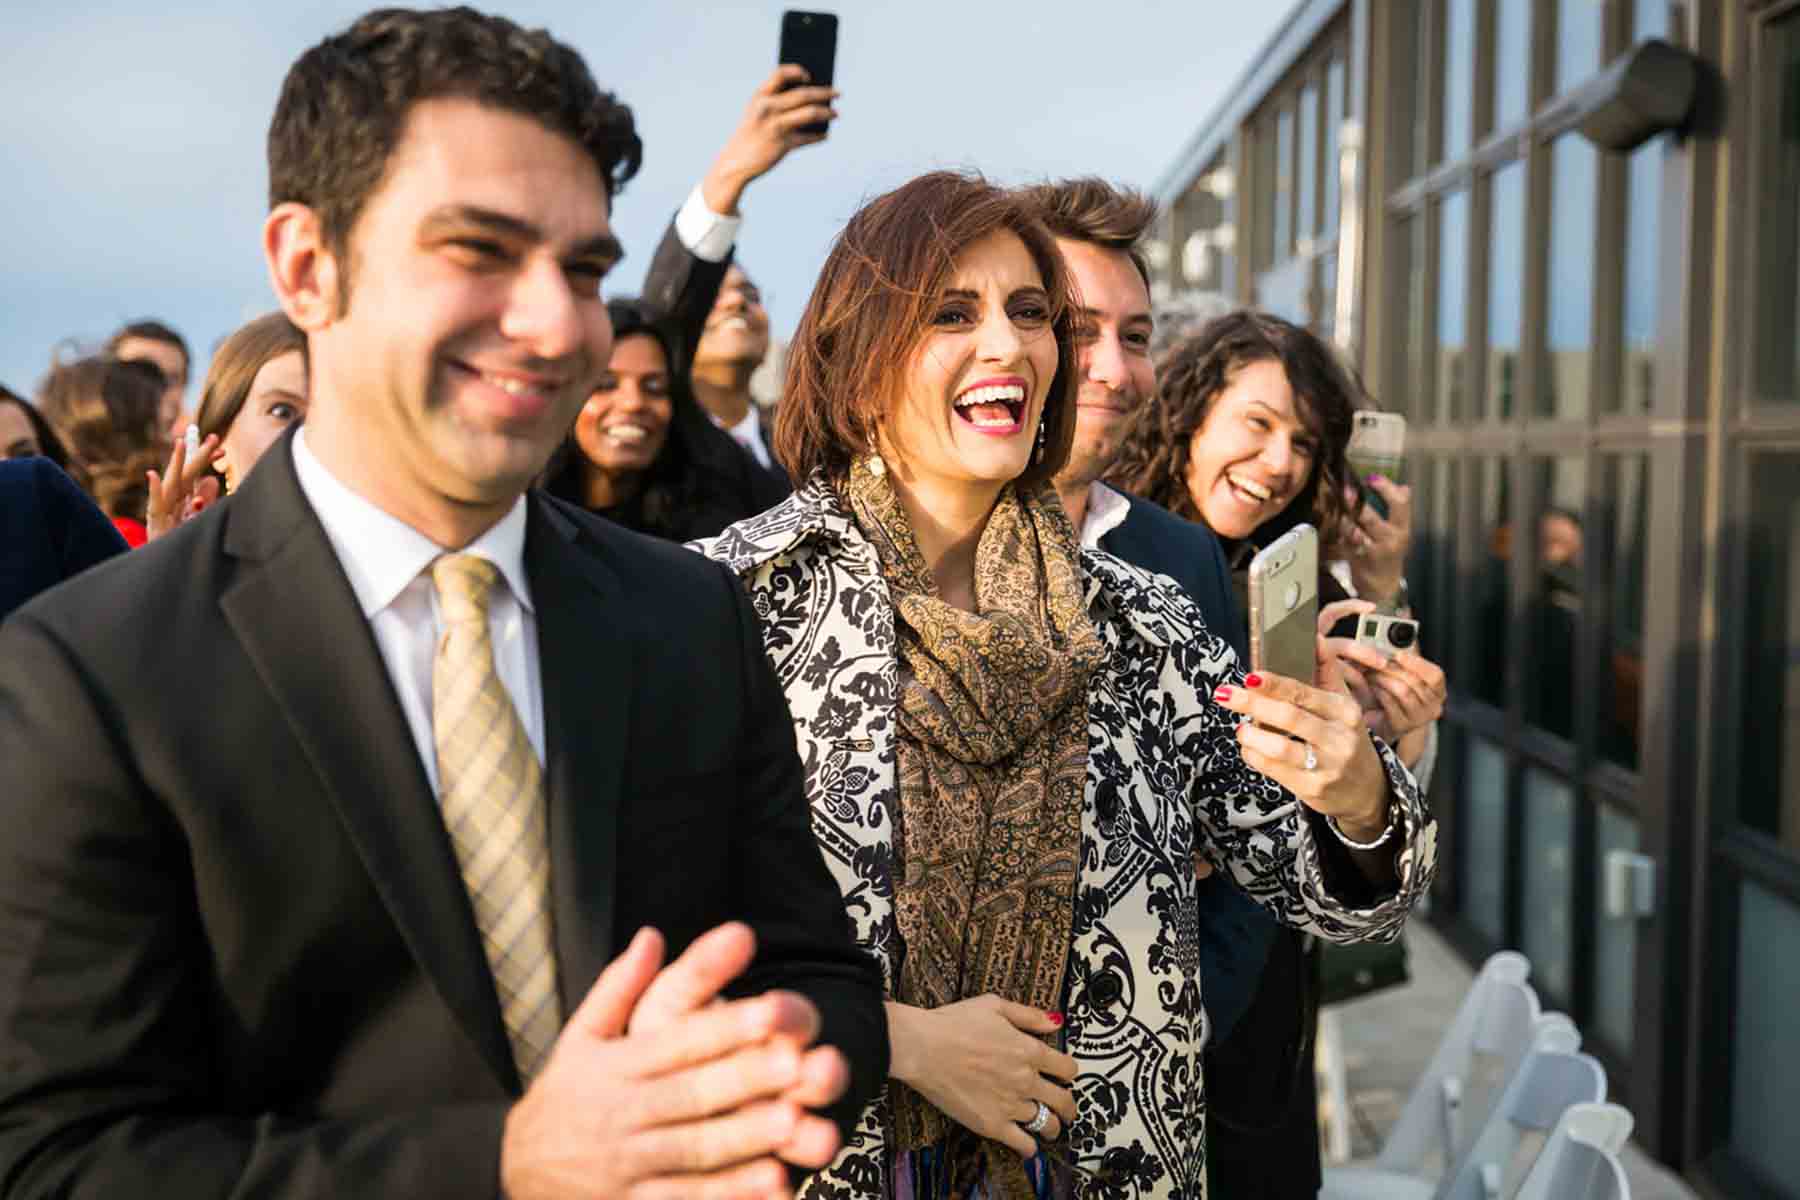 Guests cheering during outdoor ceremony for an article on how to save money on wedding photography